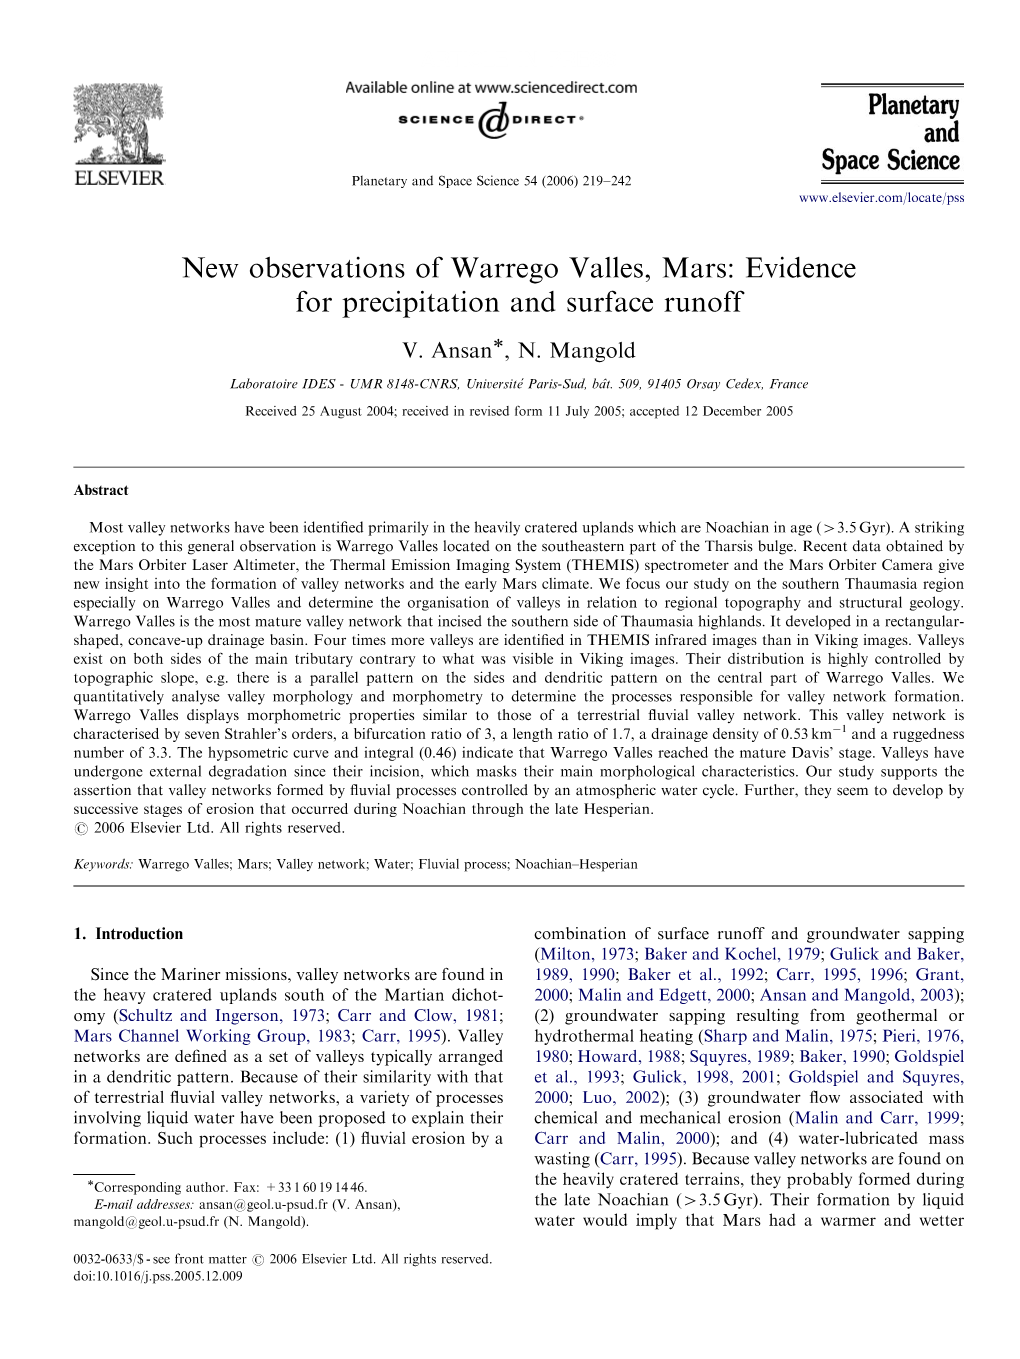 New Observations of Warrego Valles, Mars: Evidence for Precipitation and Surface Runoff